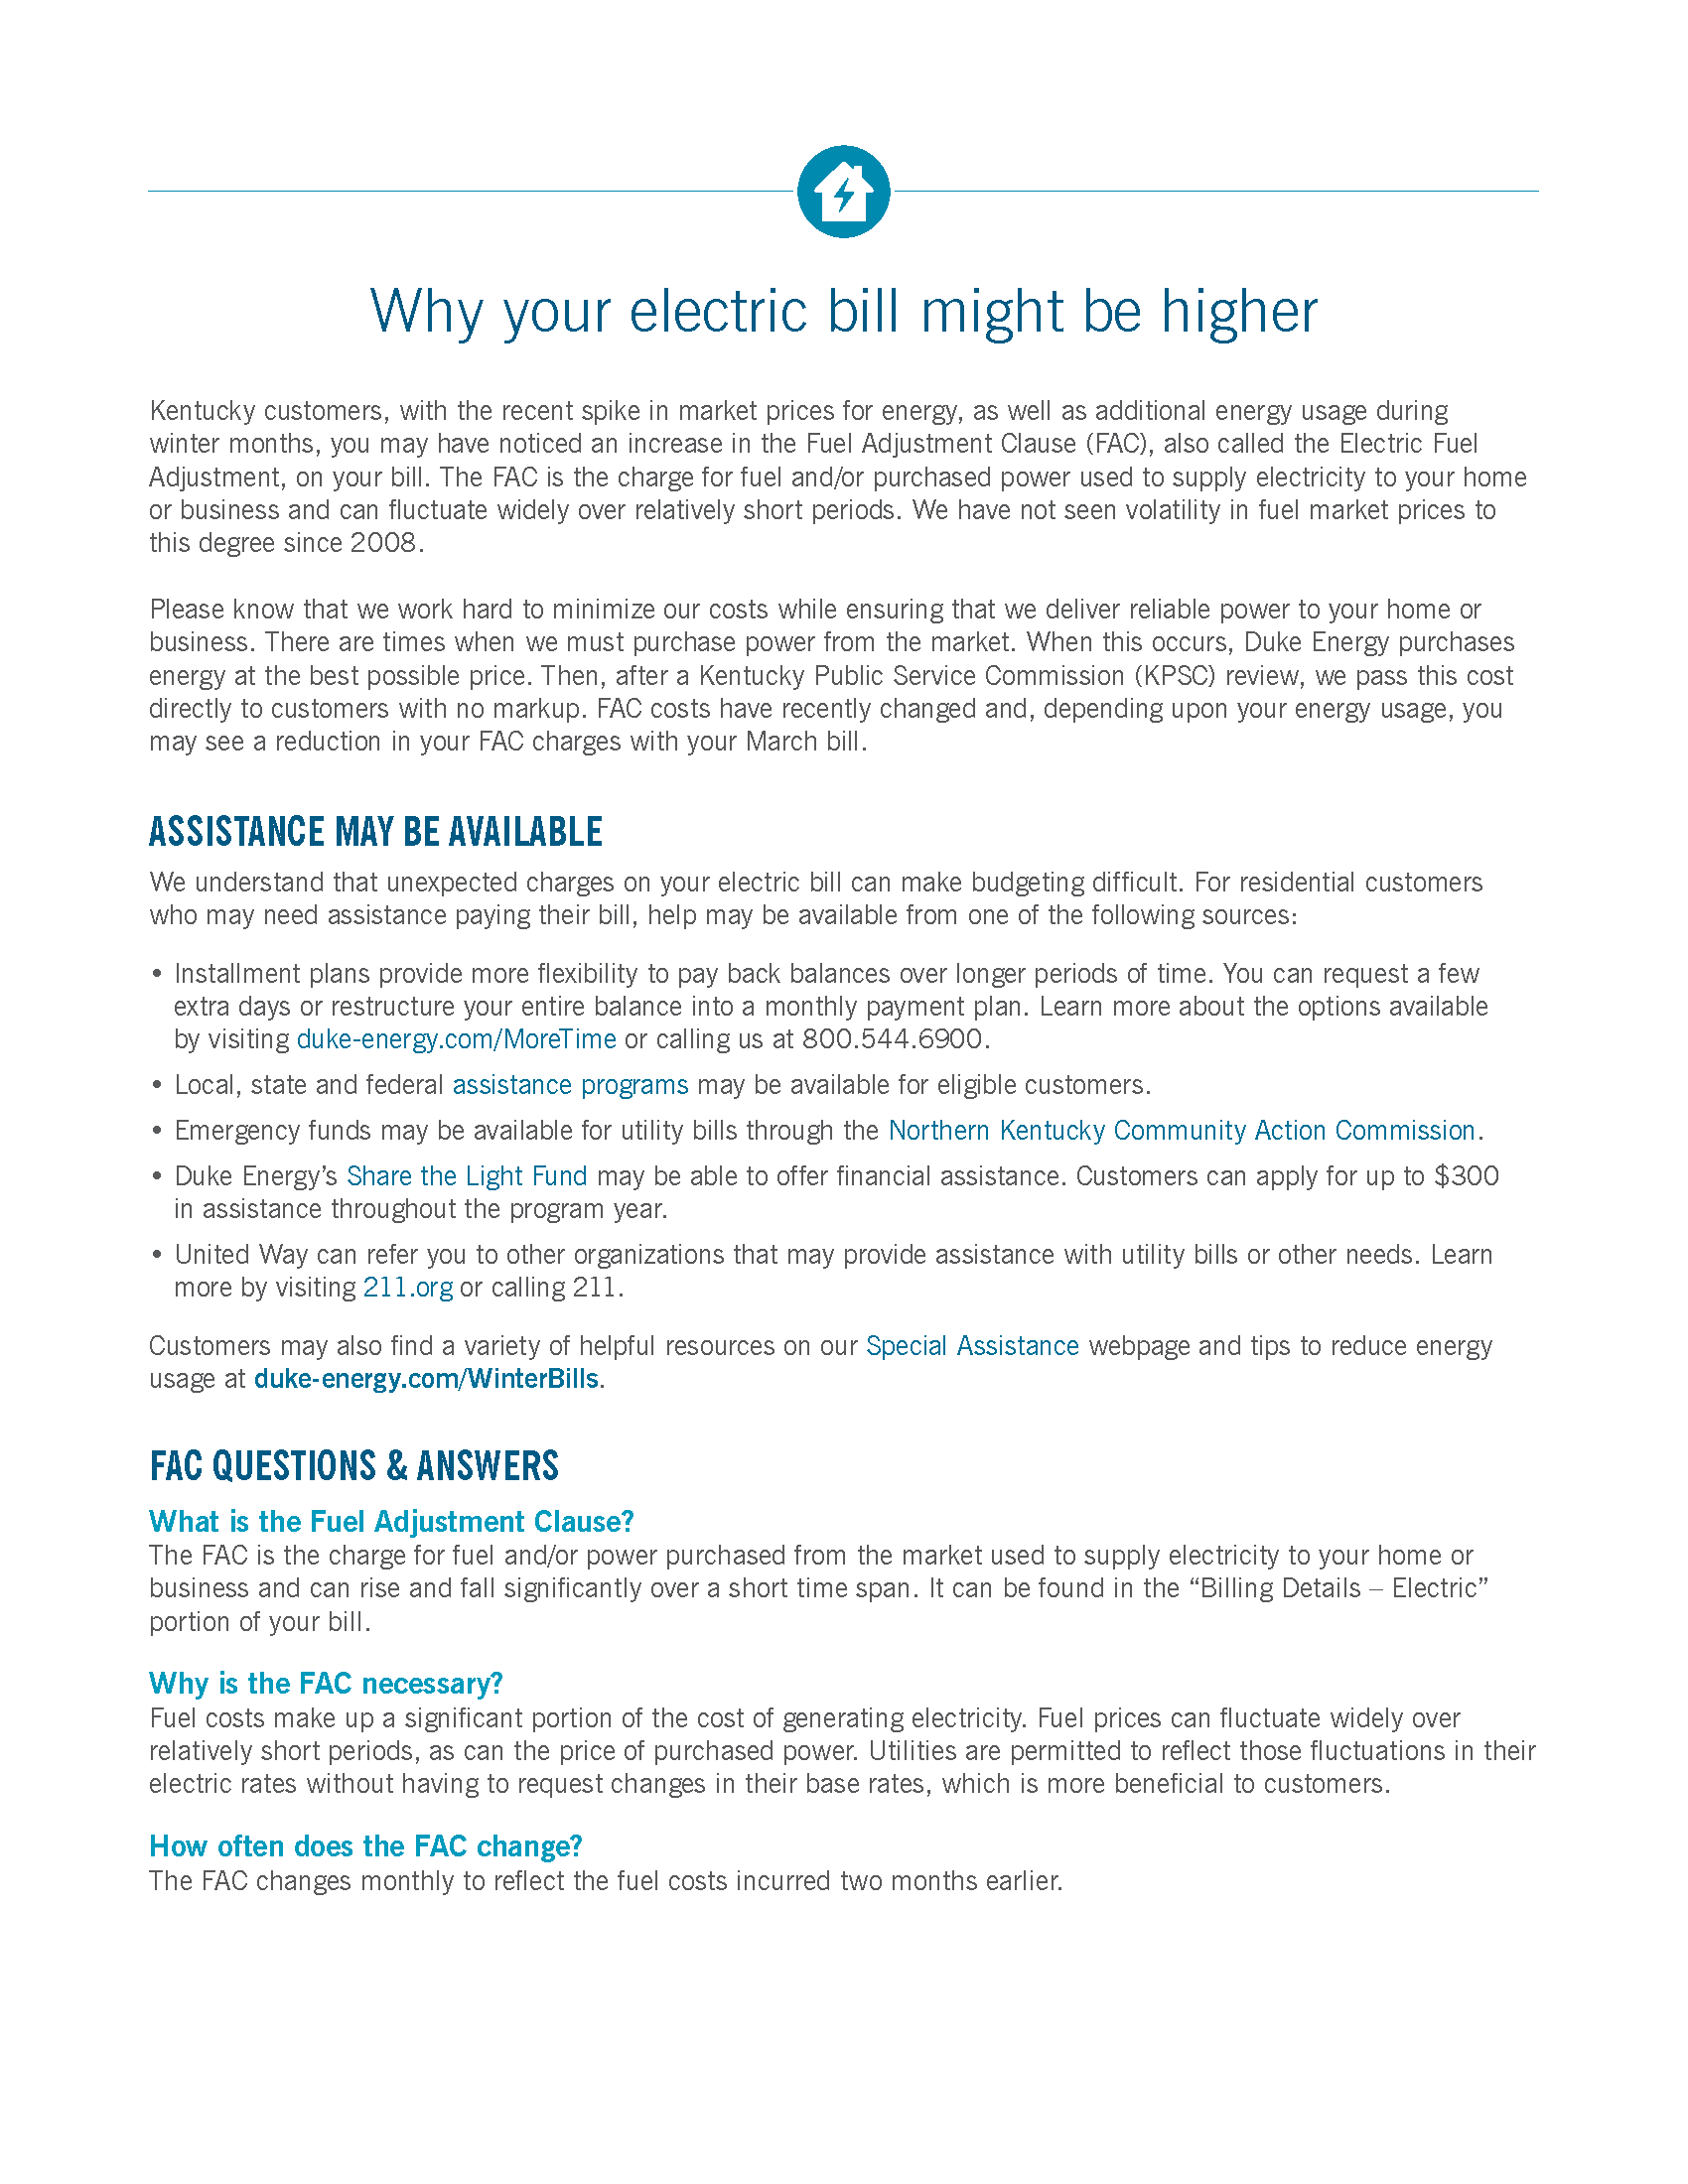 Duke EnergyWhy Your Electric Bill May Be Higher > City of Ludlow